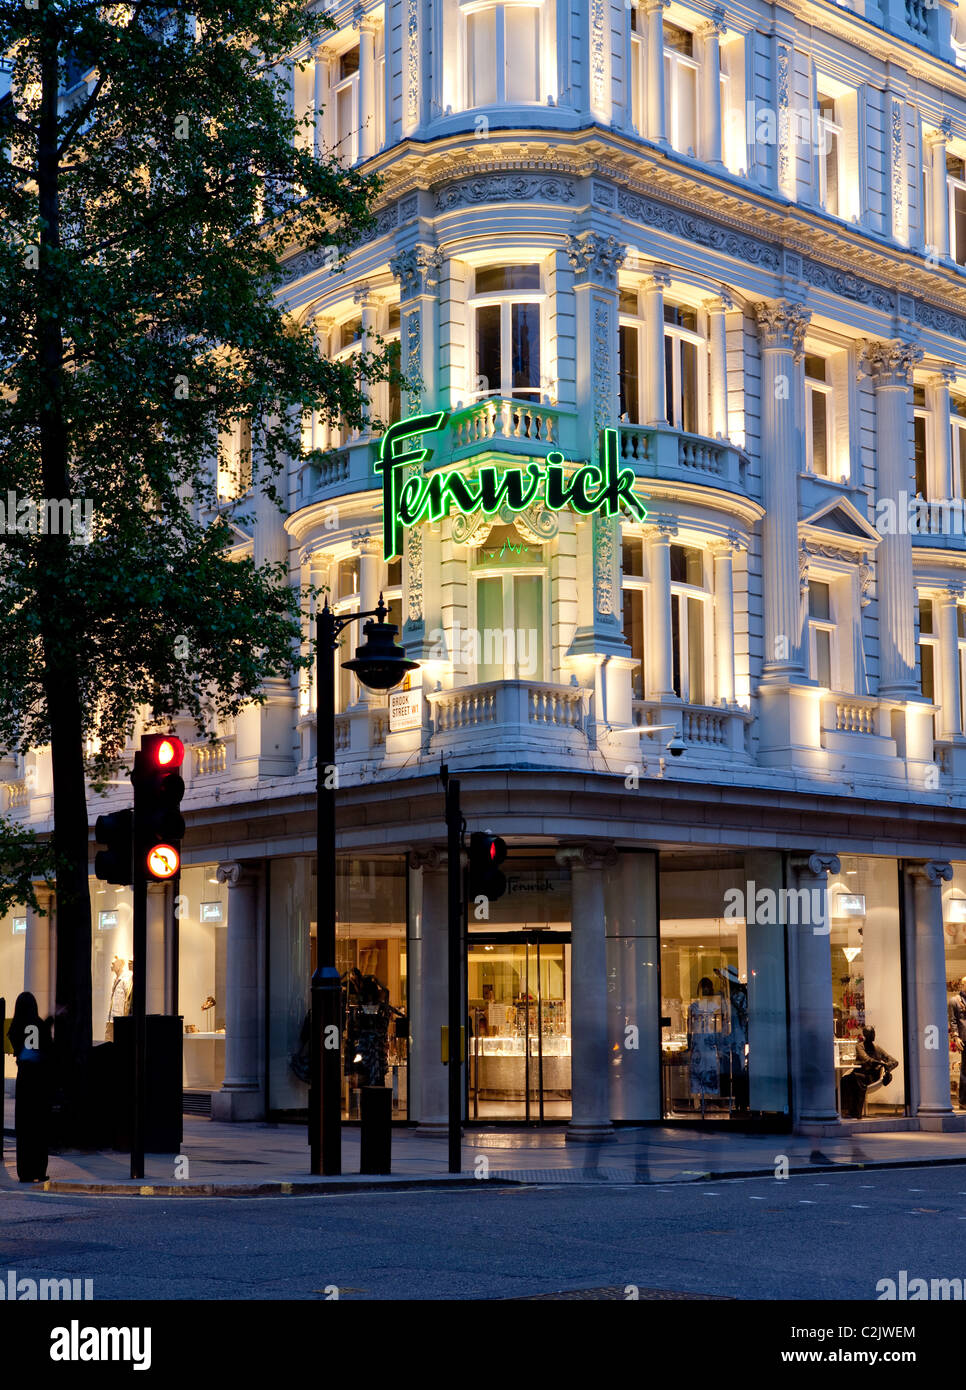 Fenwick store in London in the evening Stock Photo